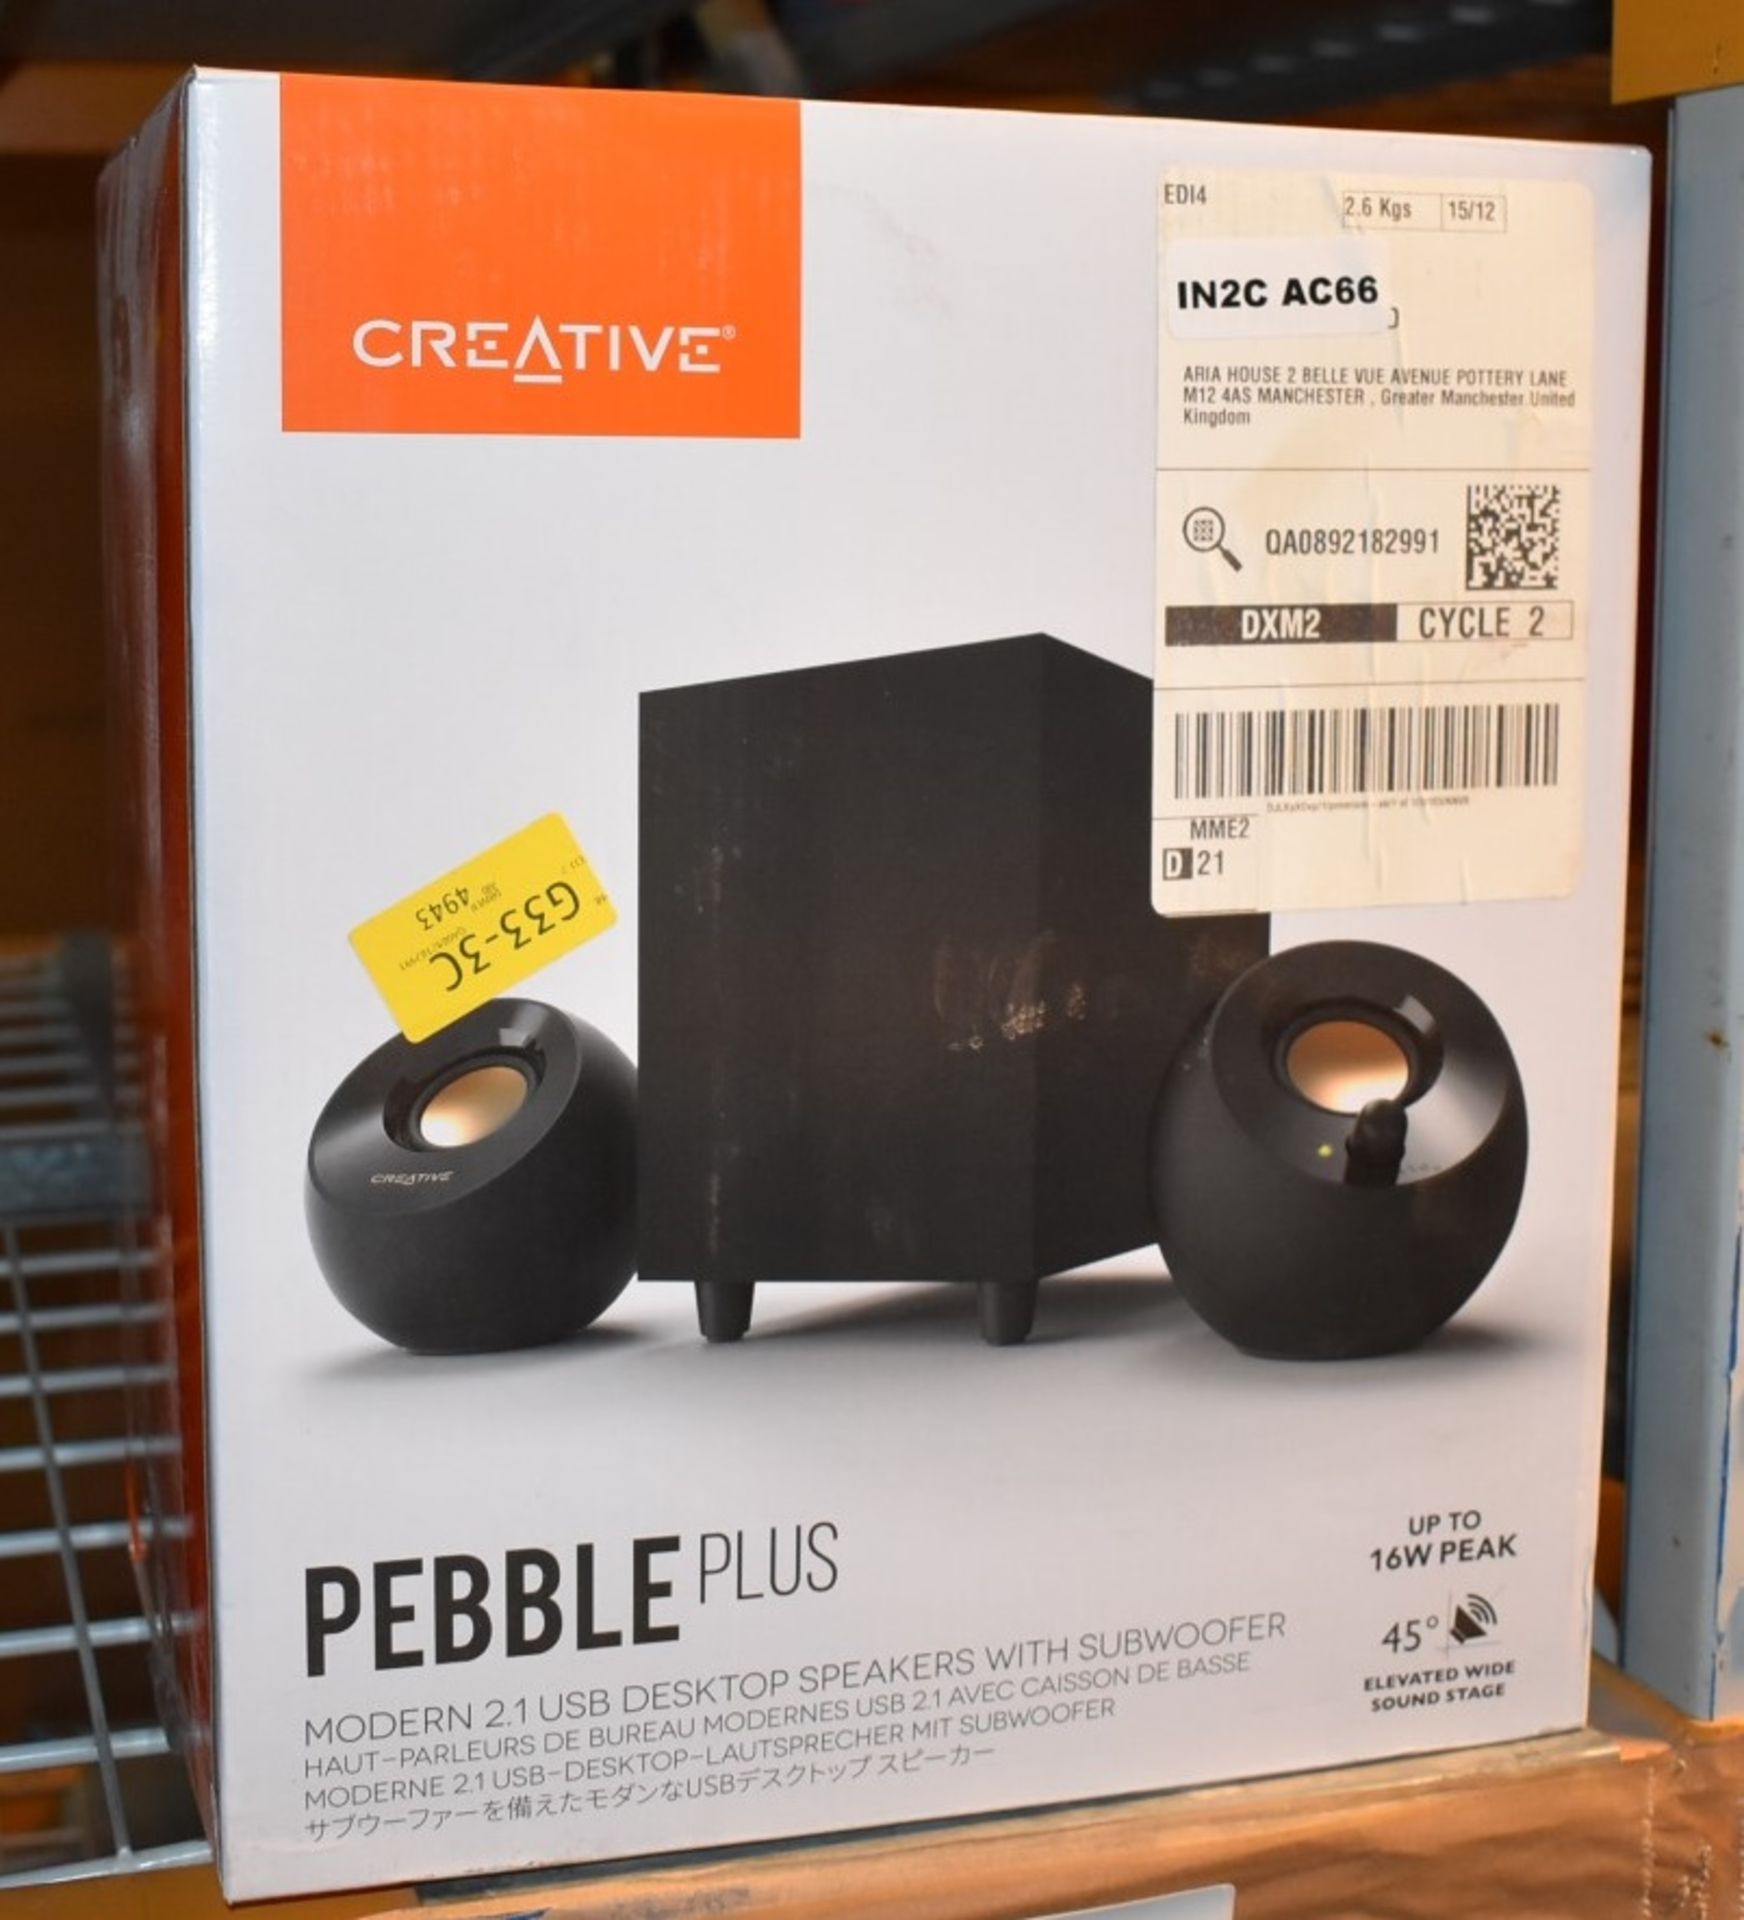 1 x Creative Pebble Plus 2.1 USB Desktop Speakers With Subwoofer - New Boxed Stock - Ref: AC66